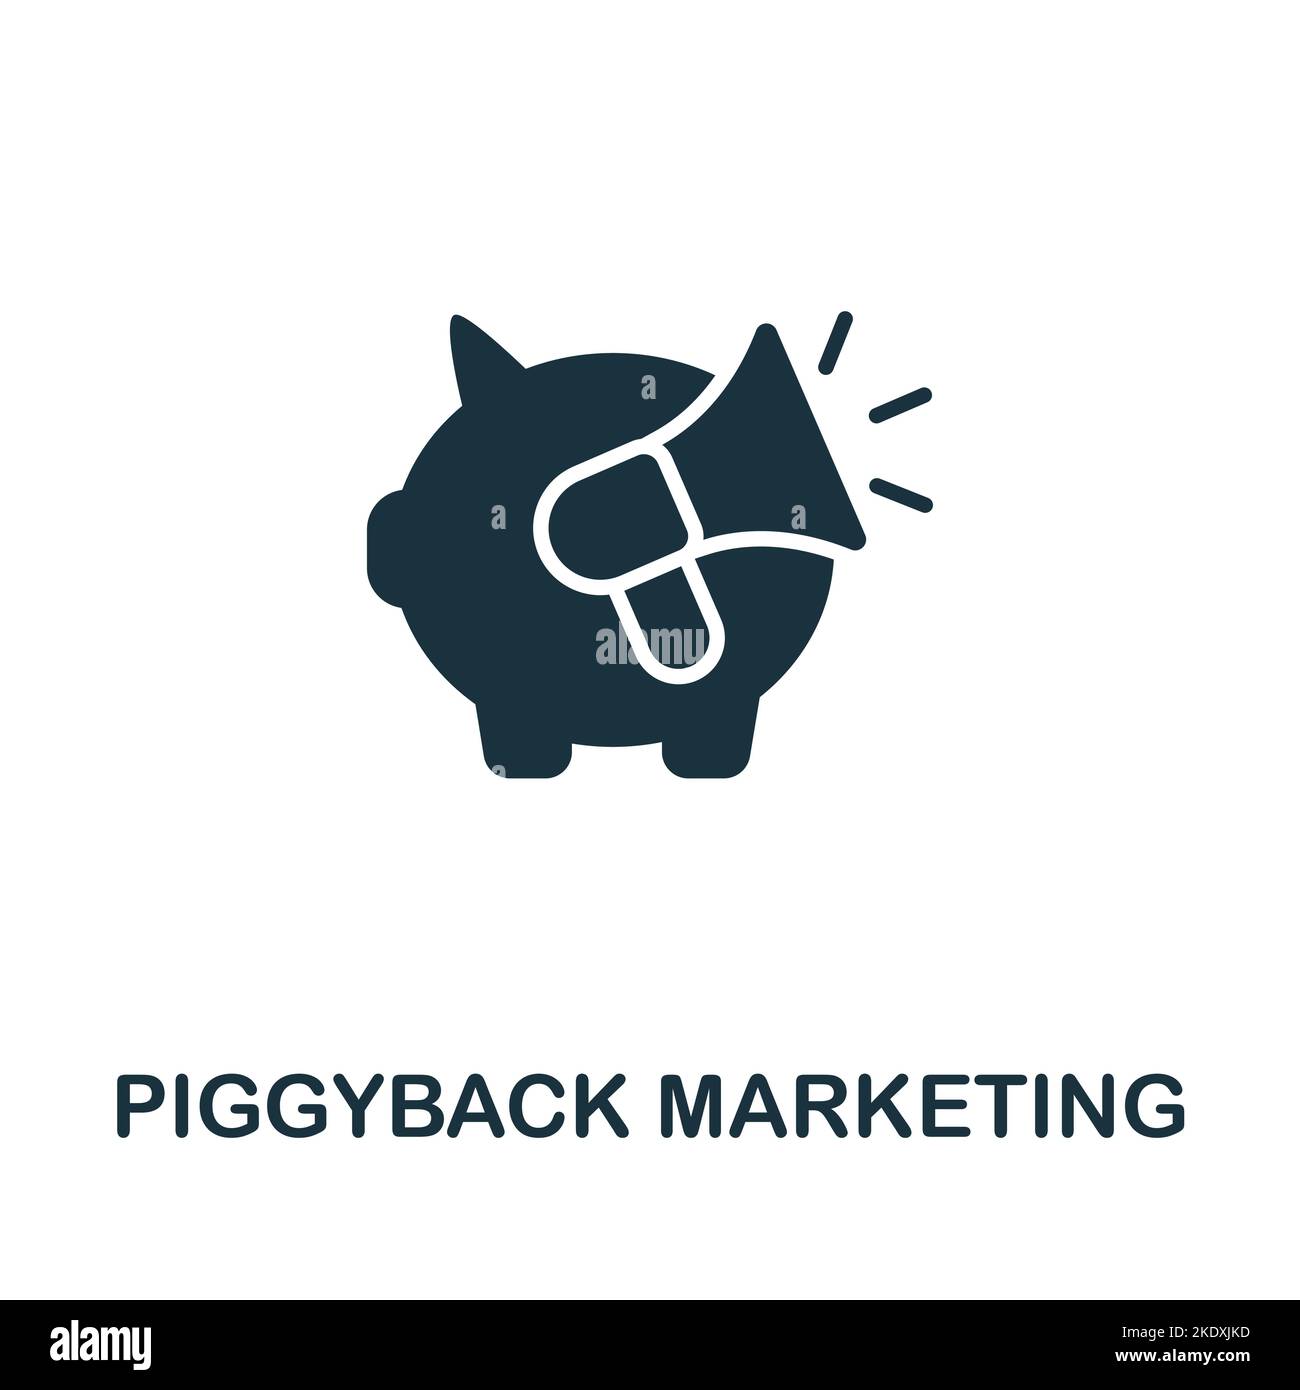 Piggyback Marketing icon. Monochrome simple Global Business icon for templates, web design and infographics Stock Vector